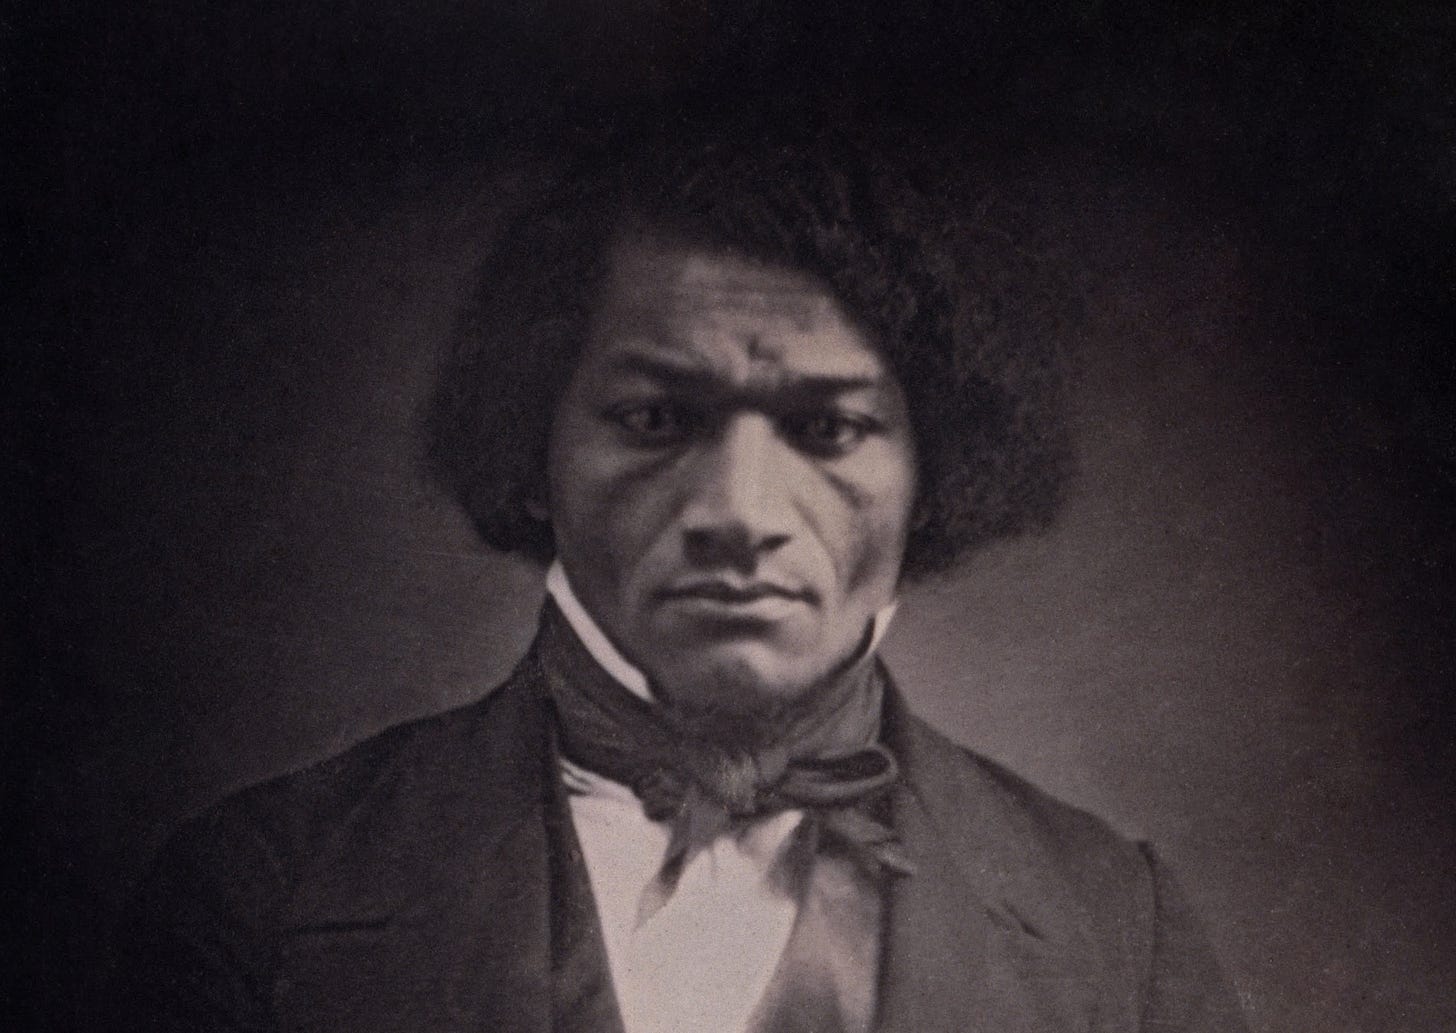 Frederick Douglass's Childhood of “Extremes” - AAIHS